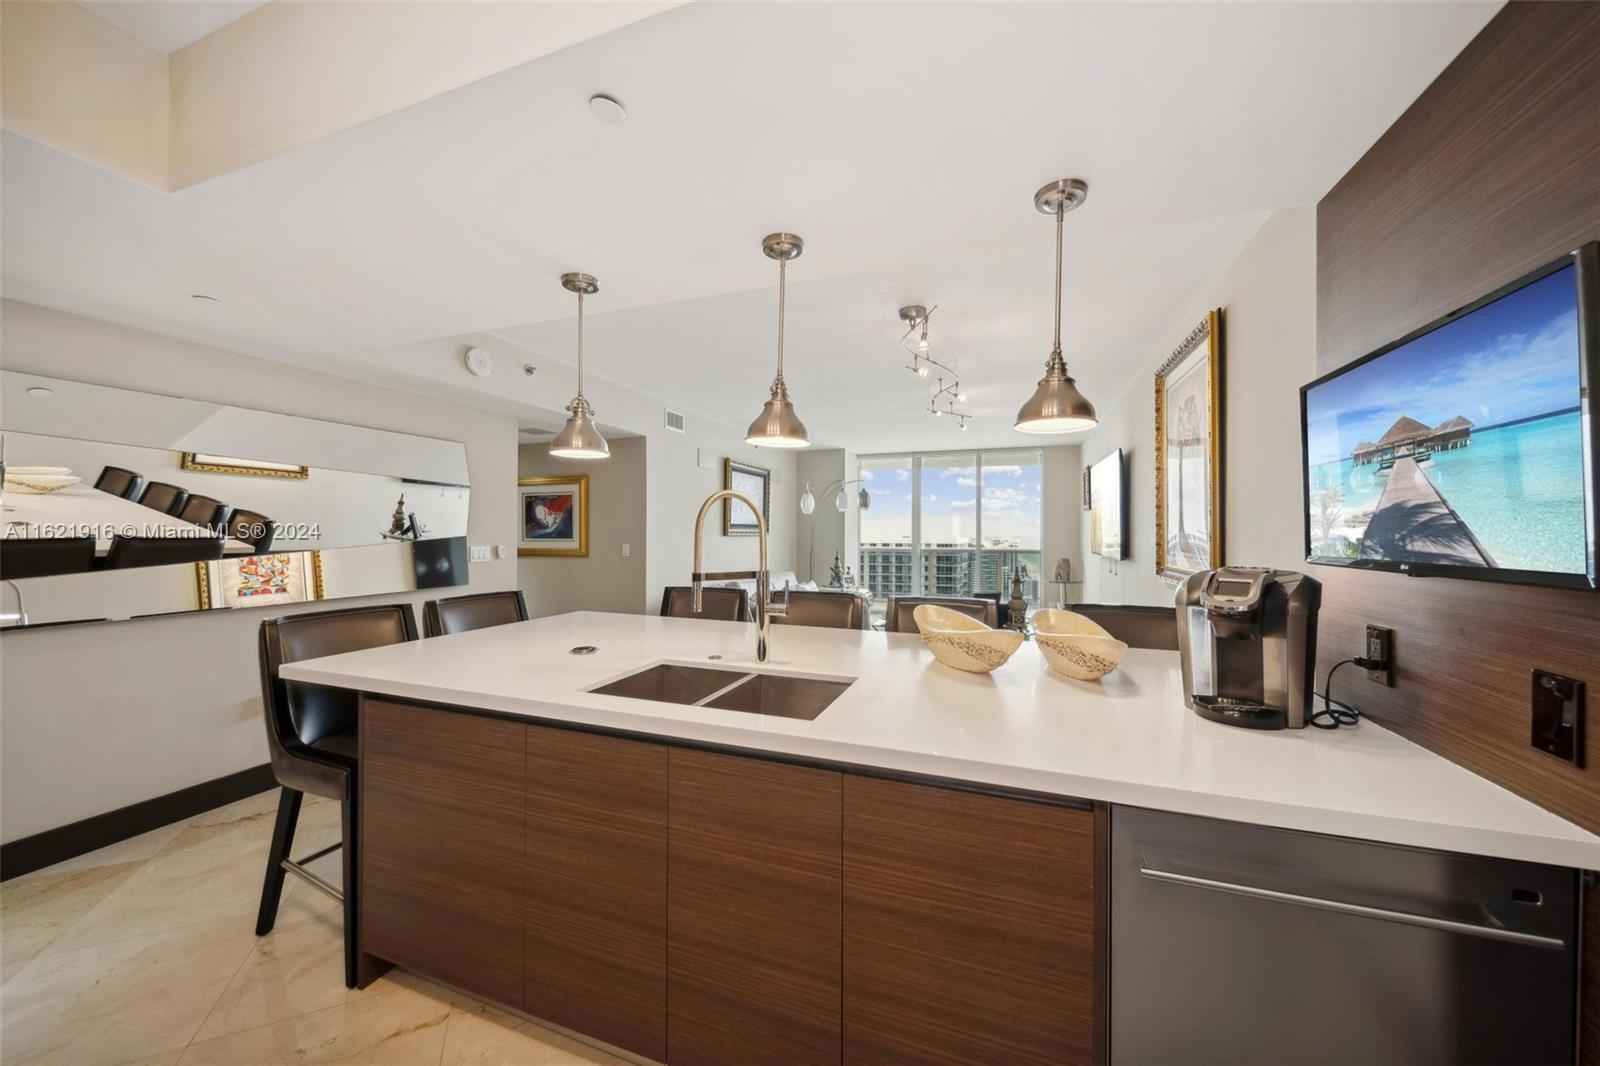 Presenting a truly unique, professionally decorated NE unit Model J, offering 3 bedrooms and 2 bathrooms 1,554 sq. ft. plus a 264 sq. ft. balcony. Never rented before, this 49th-floor Lower Penthouse features spectacular ocean and Intracoastal views, marble flooring, wood doors, remote-controlled custom lighting, built-in closets, and a European-style kitchen with Subzero appliances and quartz countertops. Enjoy 5-star resort-like amenities: a grand 2-story lobby, full-time concierge and security, 24-hour valet, multi-level covered parking, 5 heated pools, a 50,000 sq. ft. spa, and a fitness center overlooking the Atlantic Ocean. Furniture negotiable.